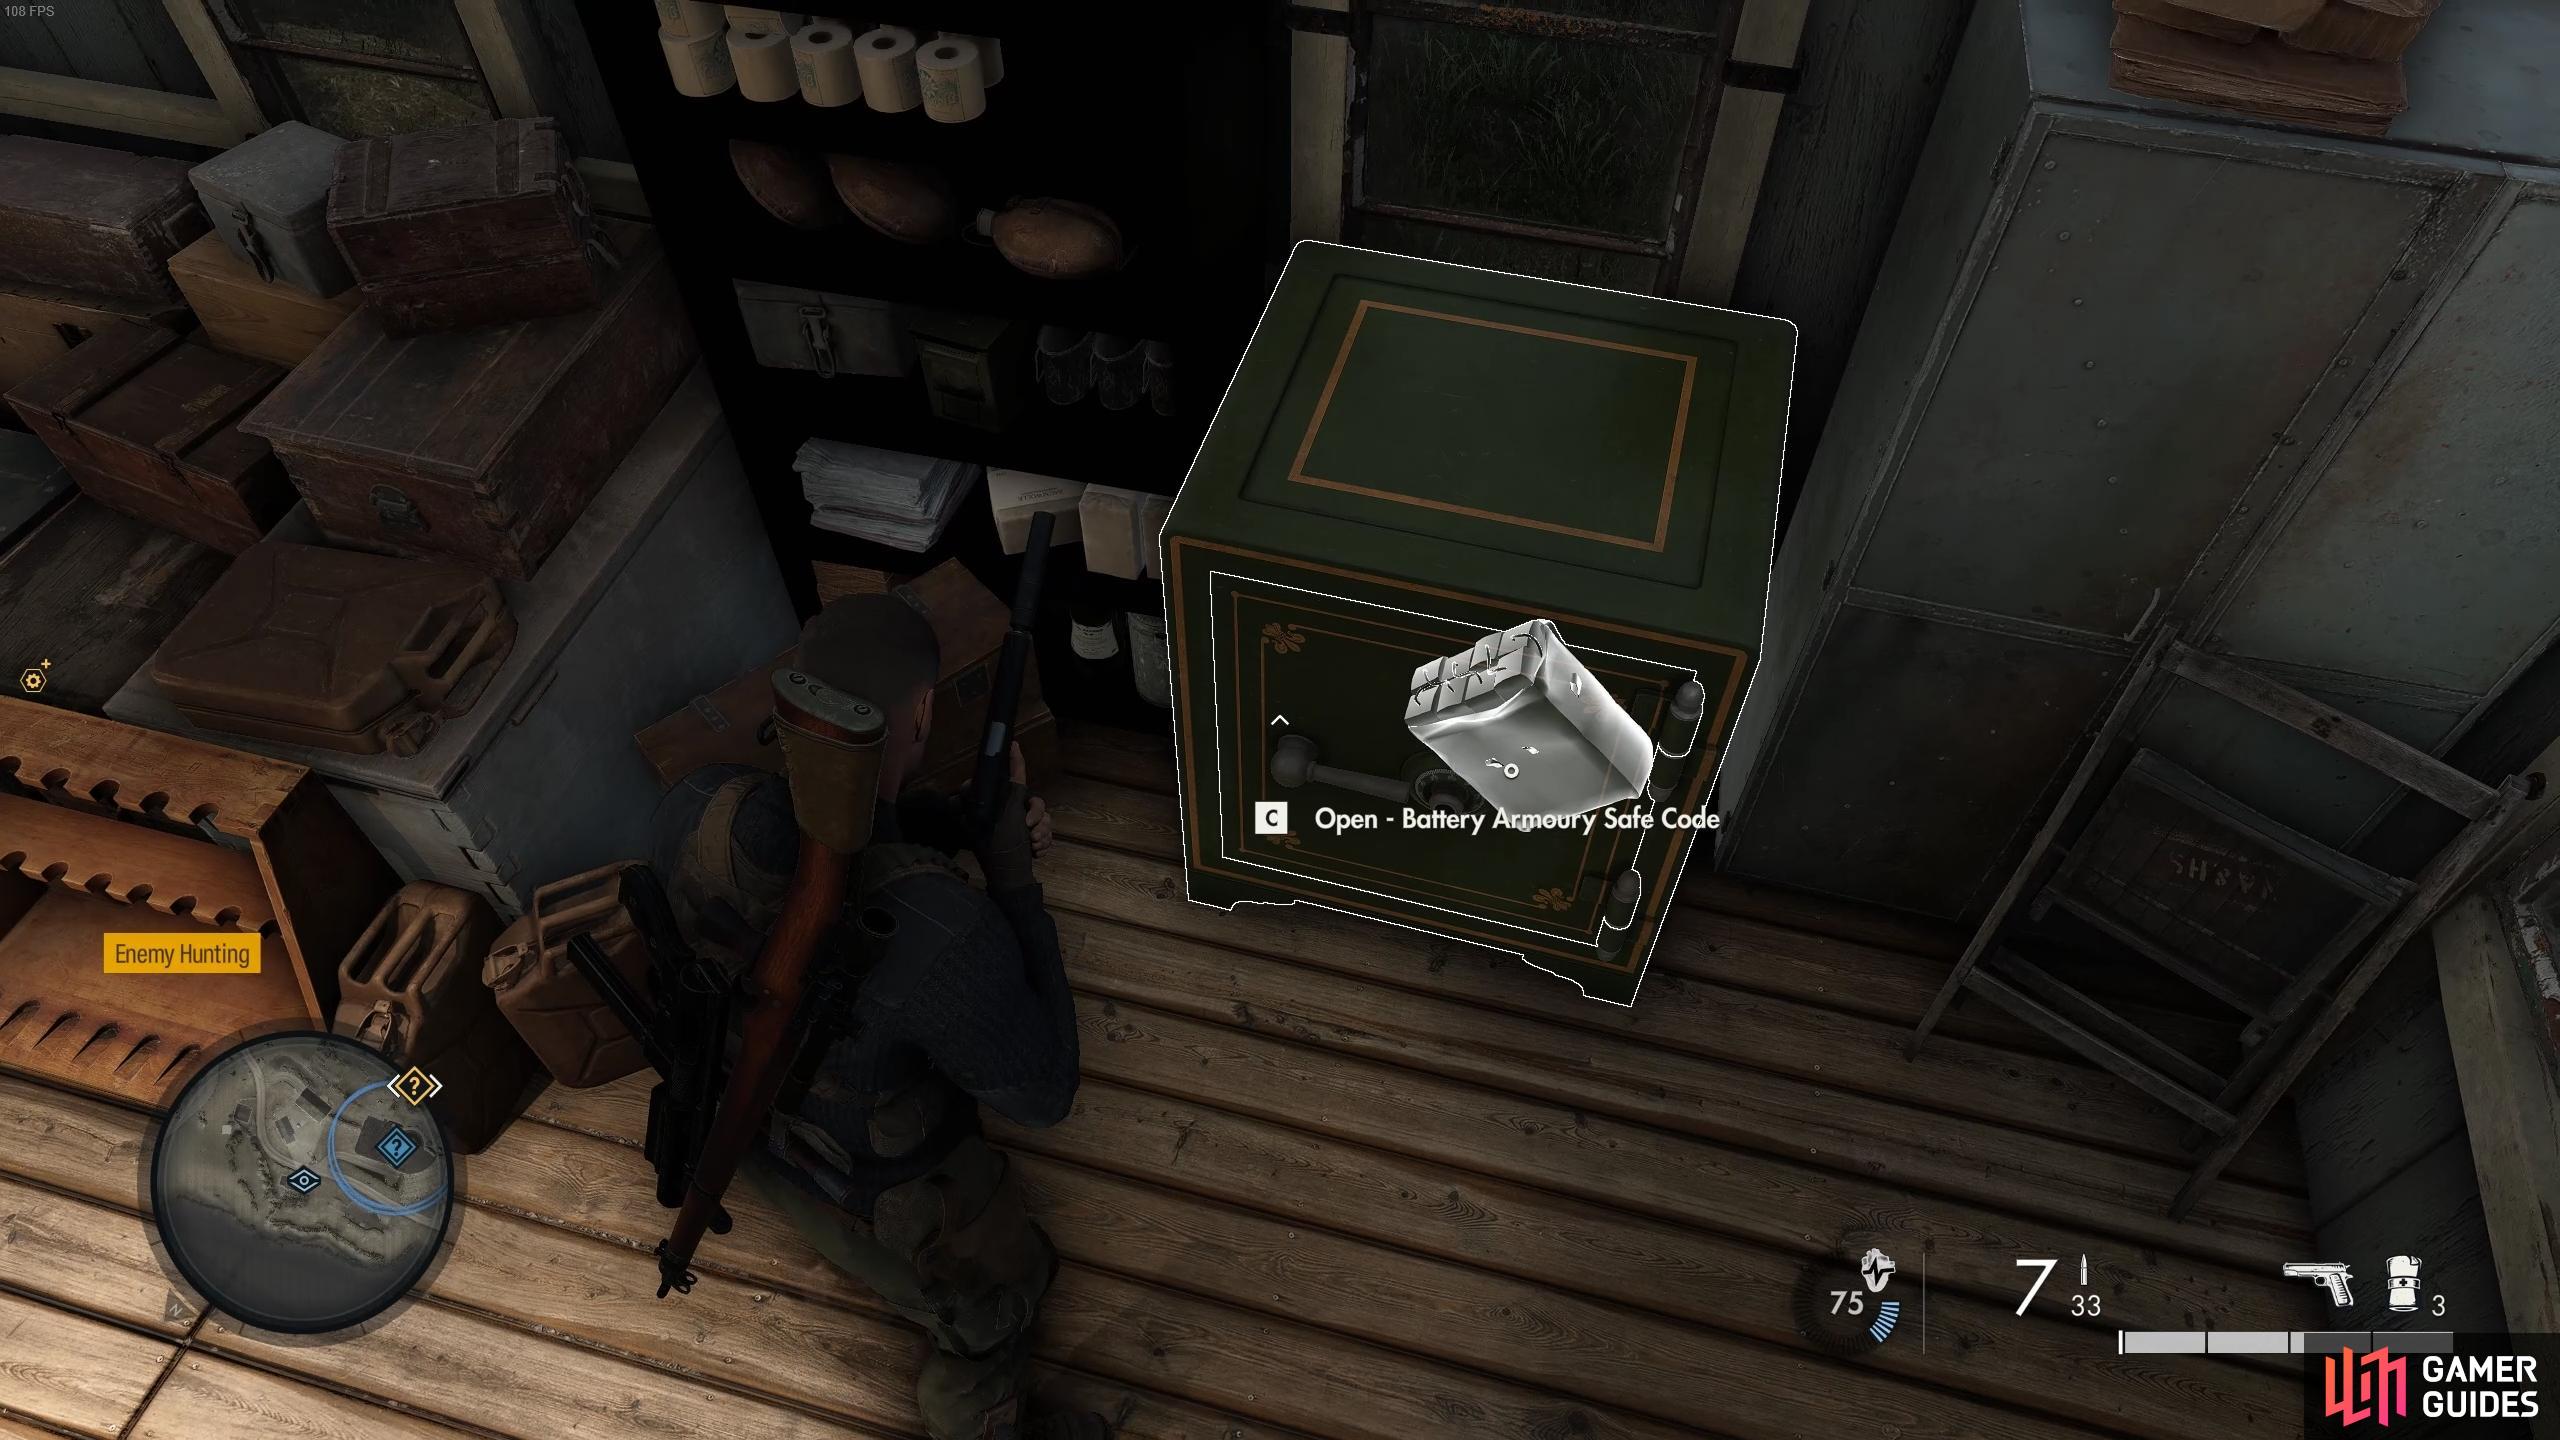 If you don’t have the key to the door, you’ll need a satchel charge to enter the room where this chest is located.